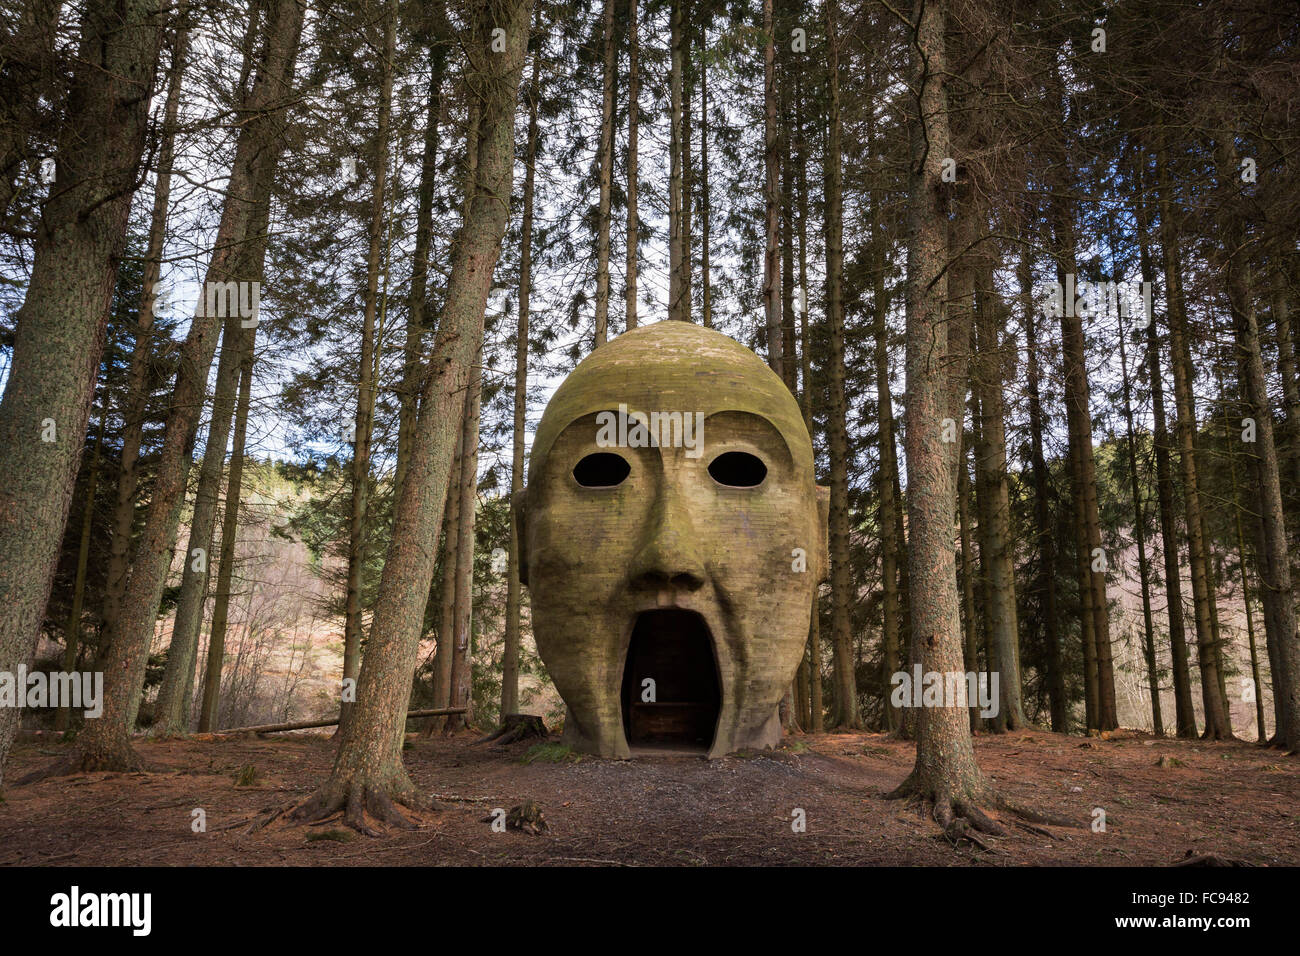 Silva capitalis, forest head sculpture, part of Kielder Water and Forest Park art trail, Northumberland, England, United Kingdom Stock Photo